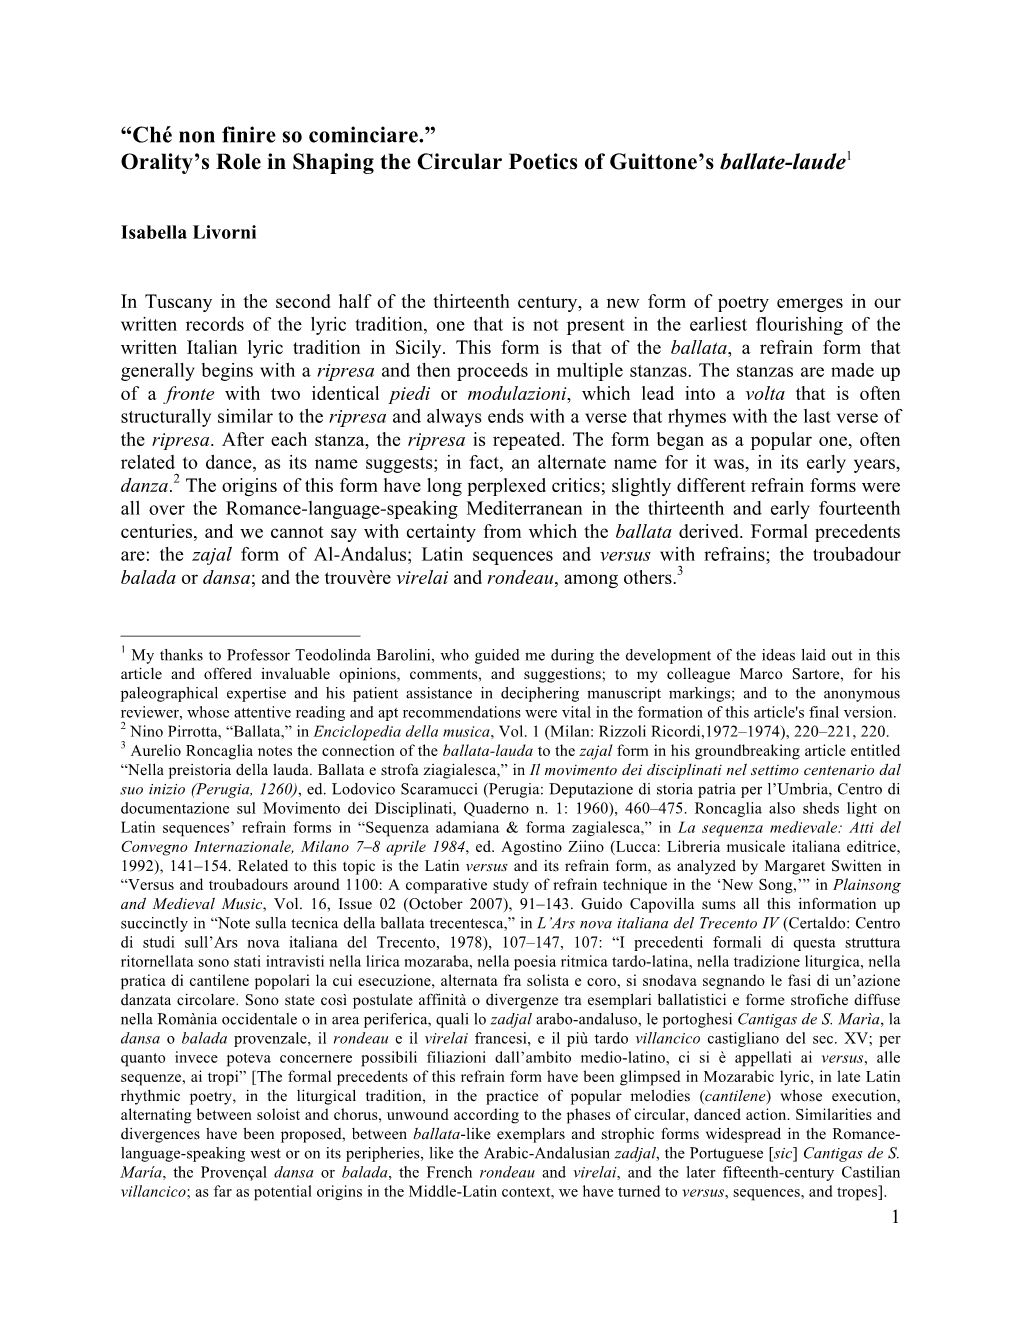 Orality's Role in Shaping the Circular Poetics of Guittone's Ballate-Laude1